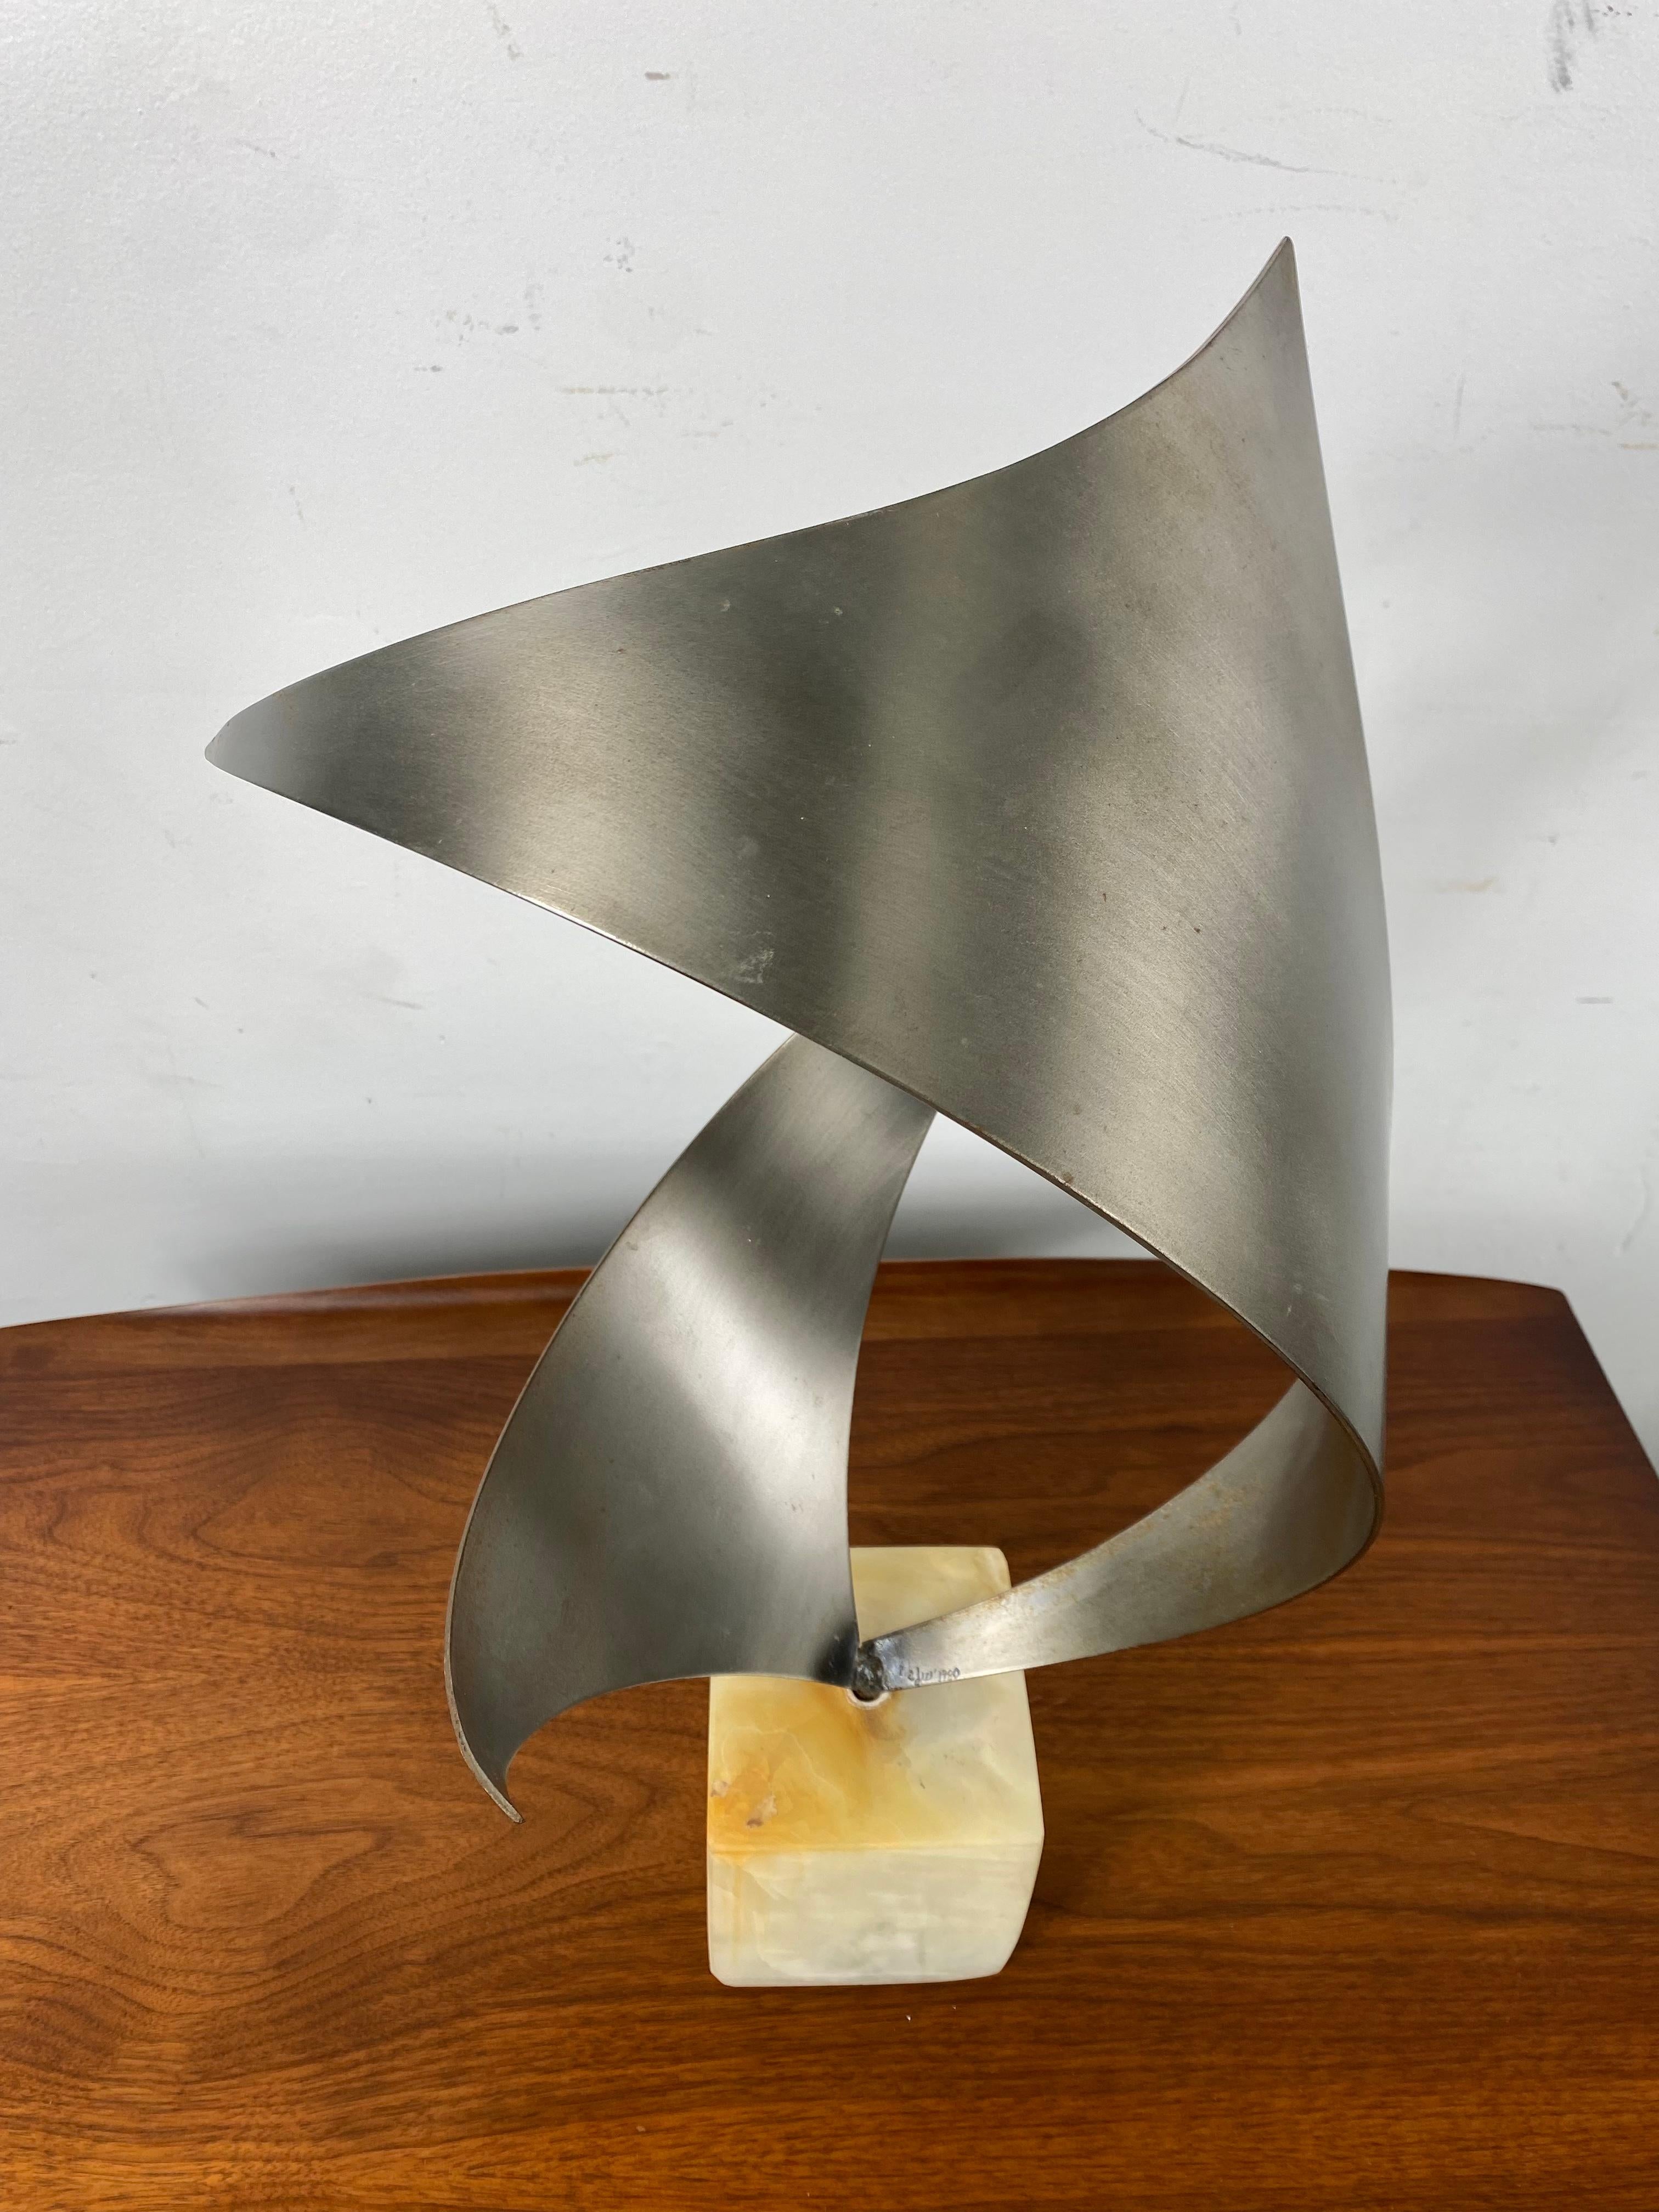 Modernist stainless steel and marble abstract table sculpture by C.Jere c.1980 Looks amazing from any angle, Signed and dated.